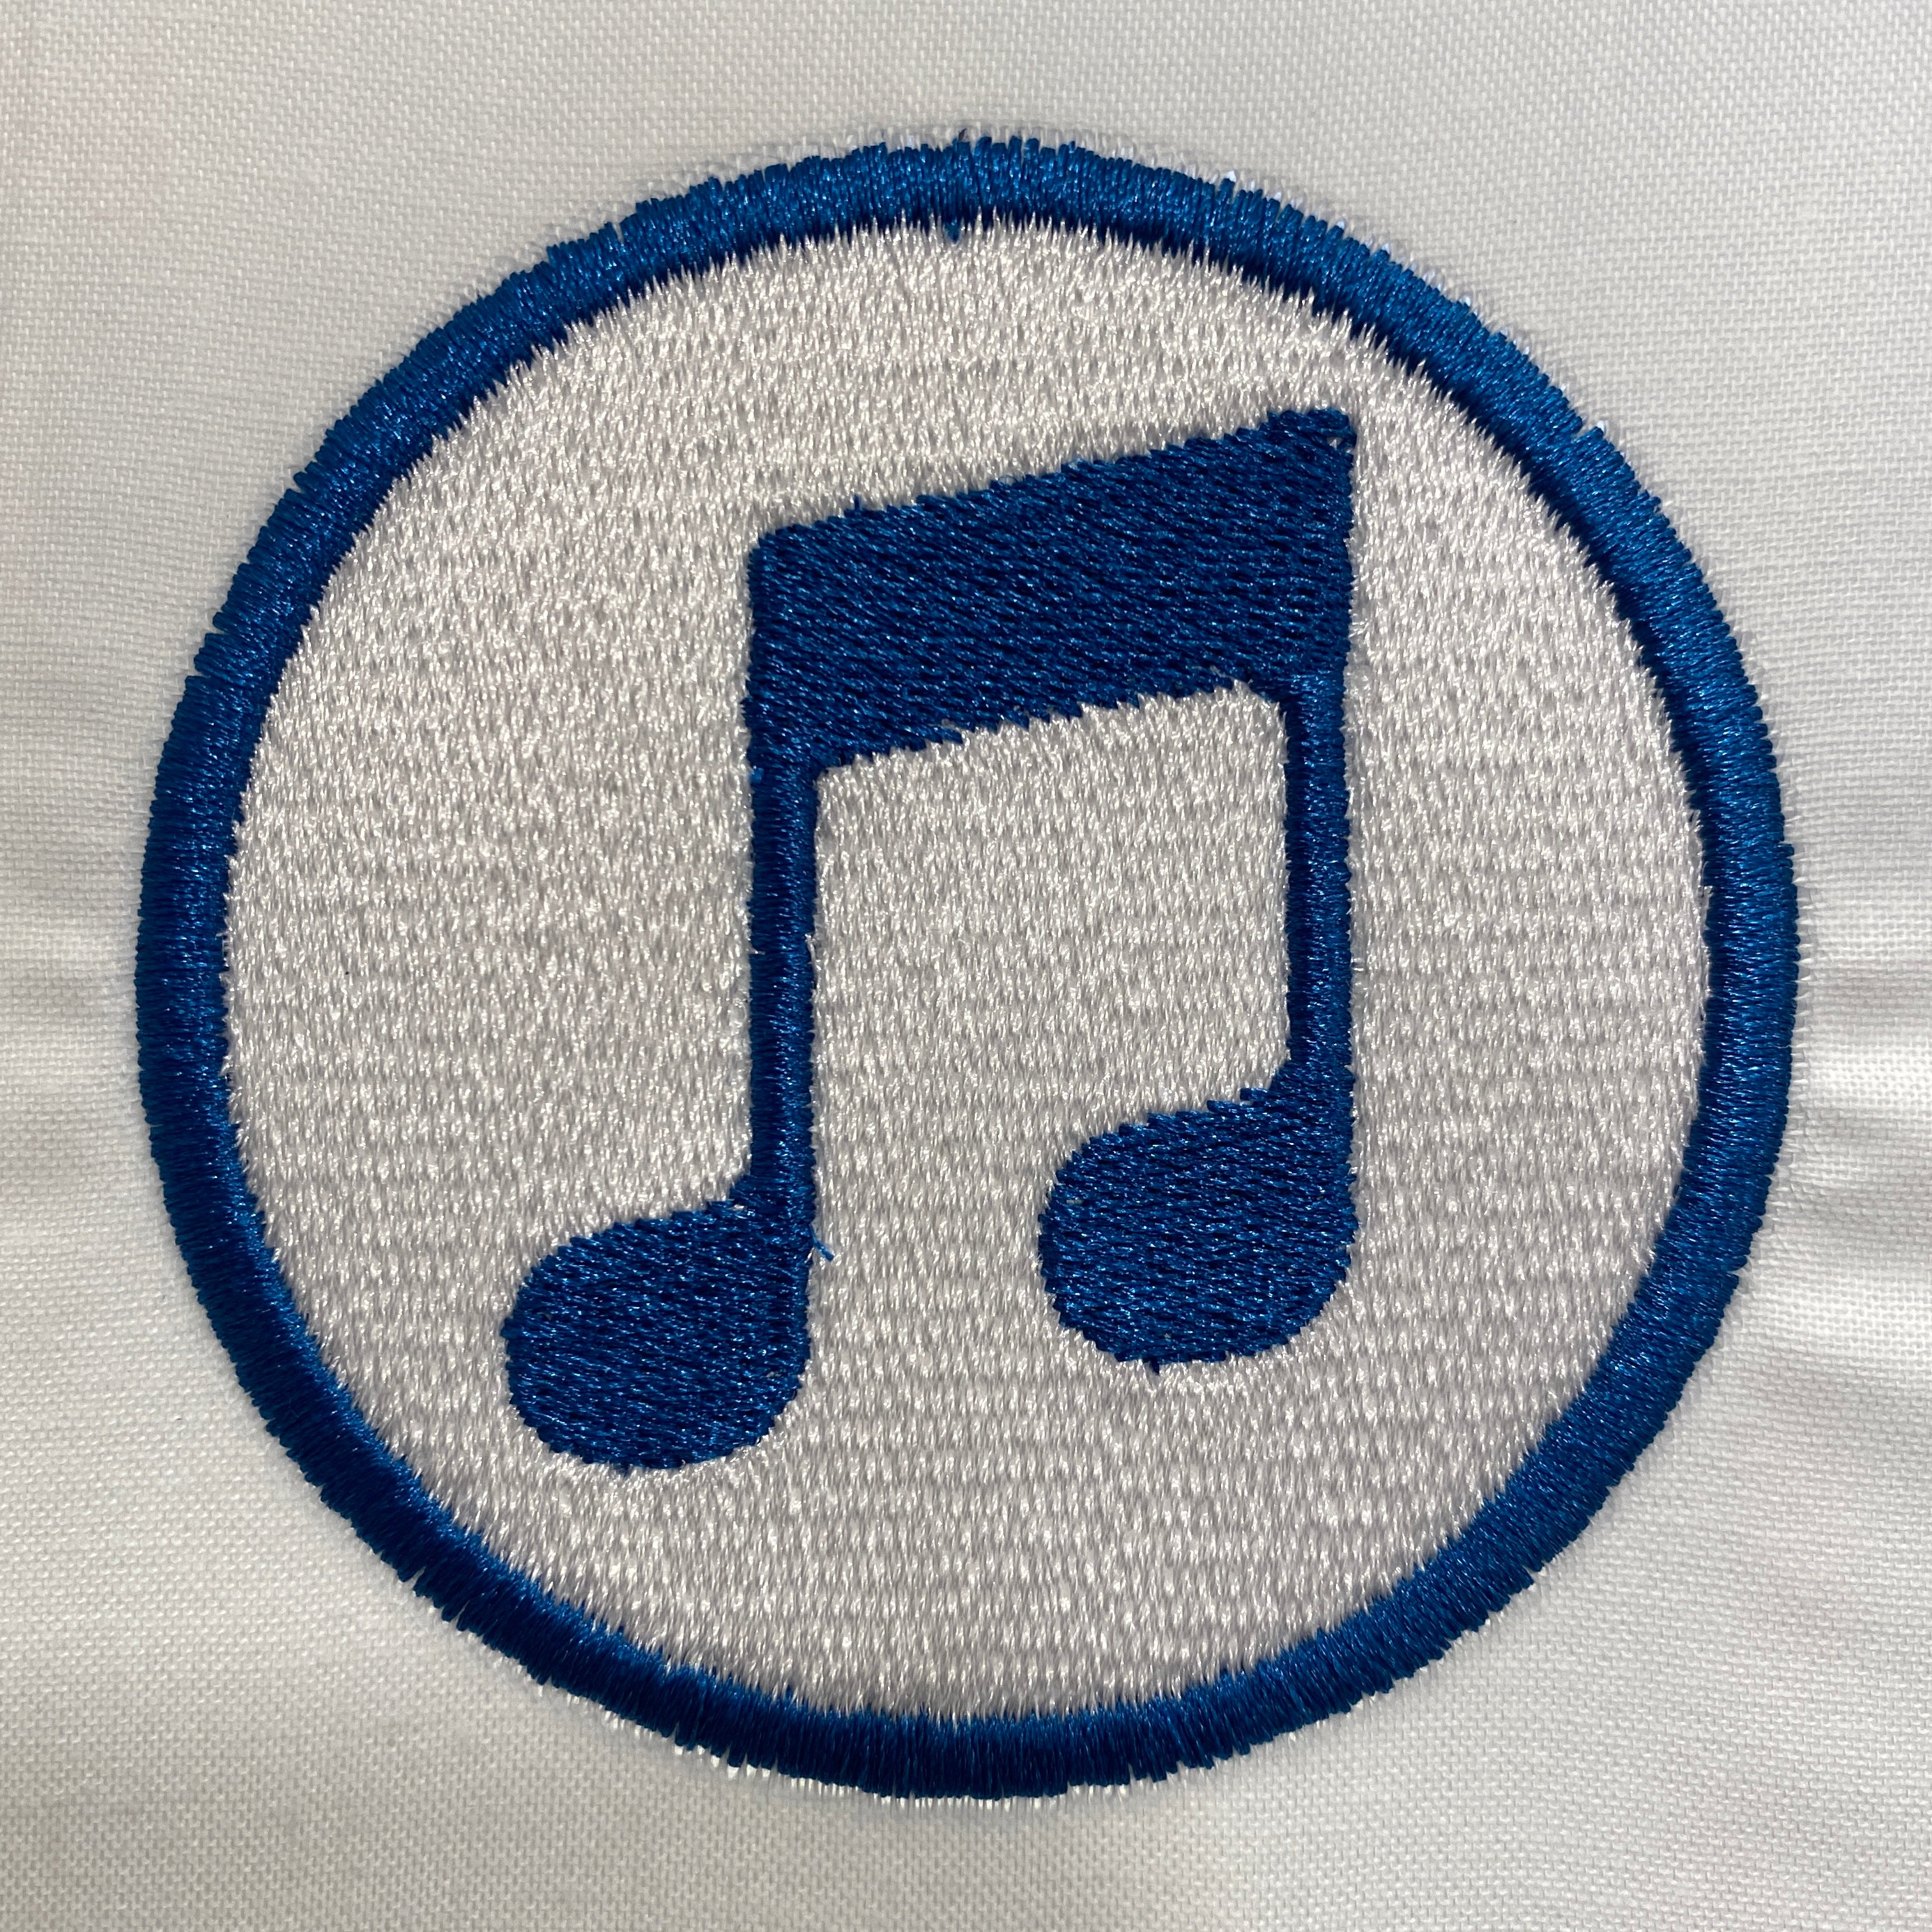 iTunes Embroidery Design